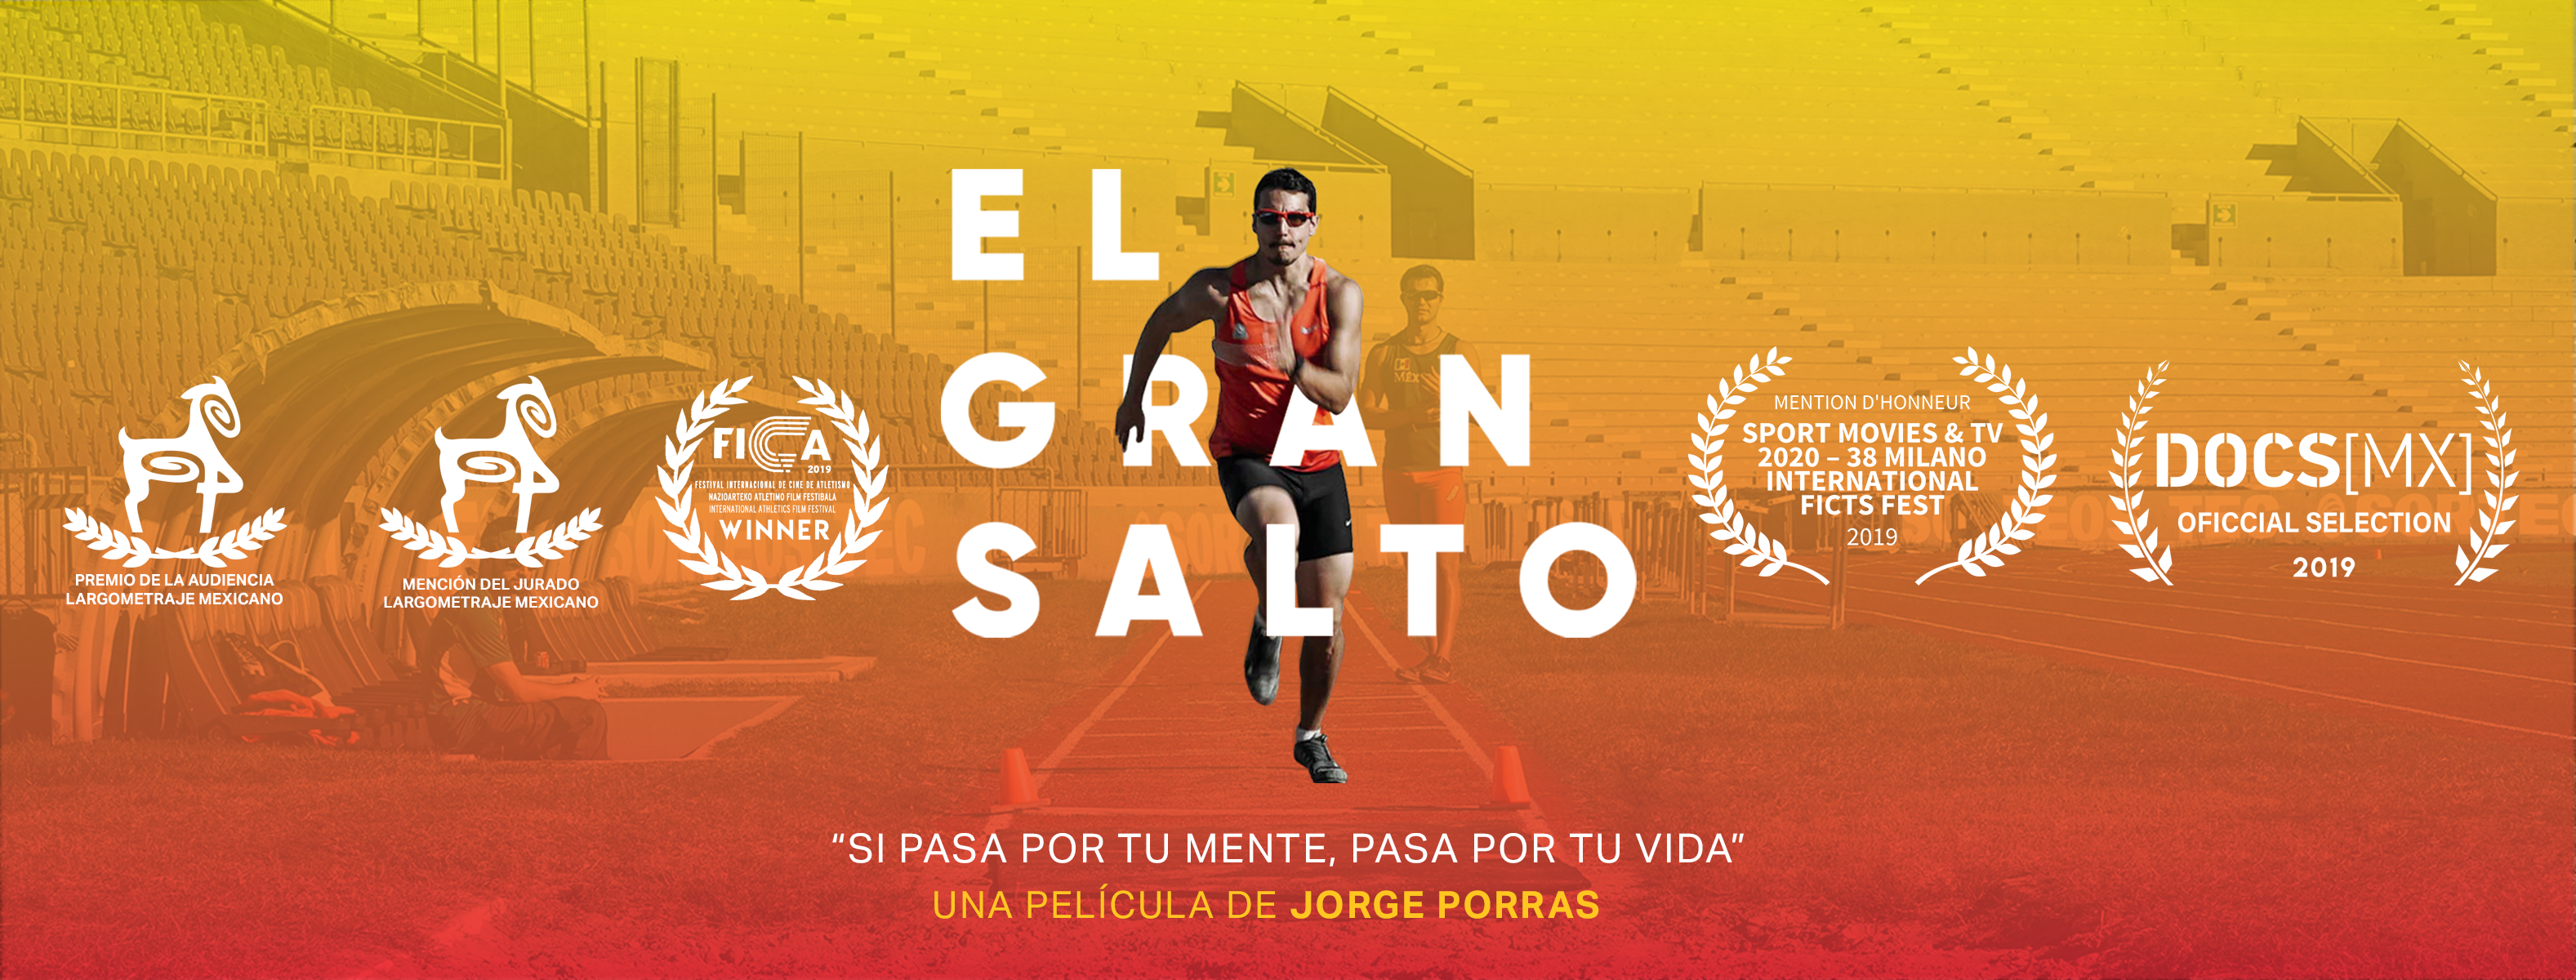 Olympic Mascots and More – a crowdfunding update for El Gran Salto